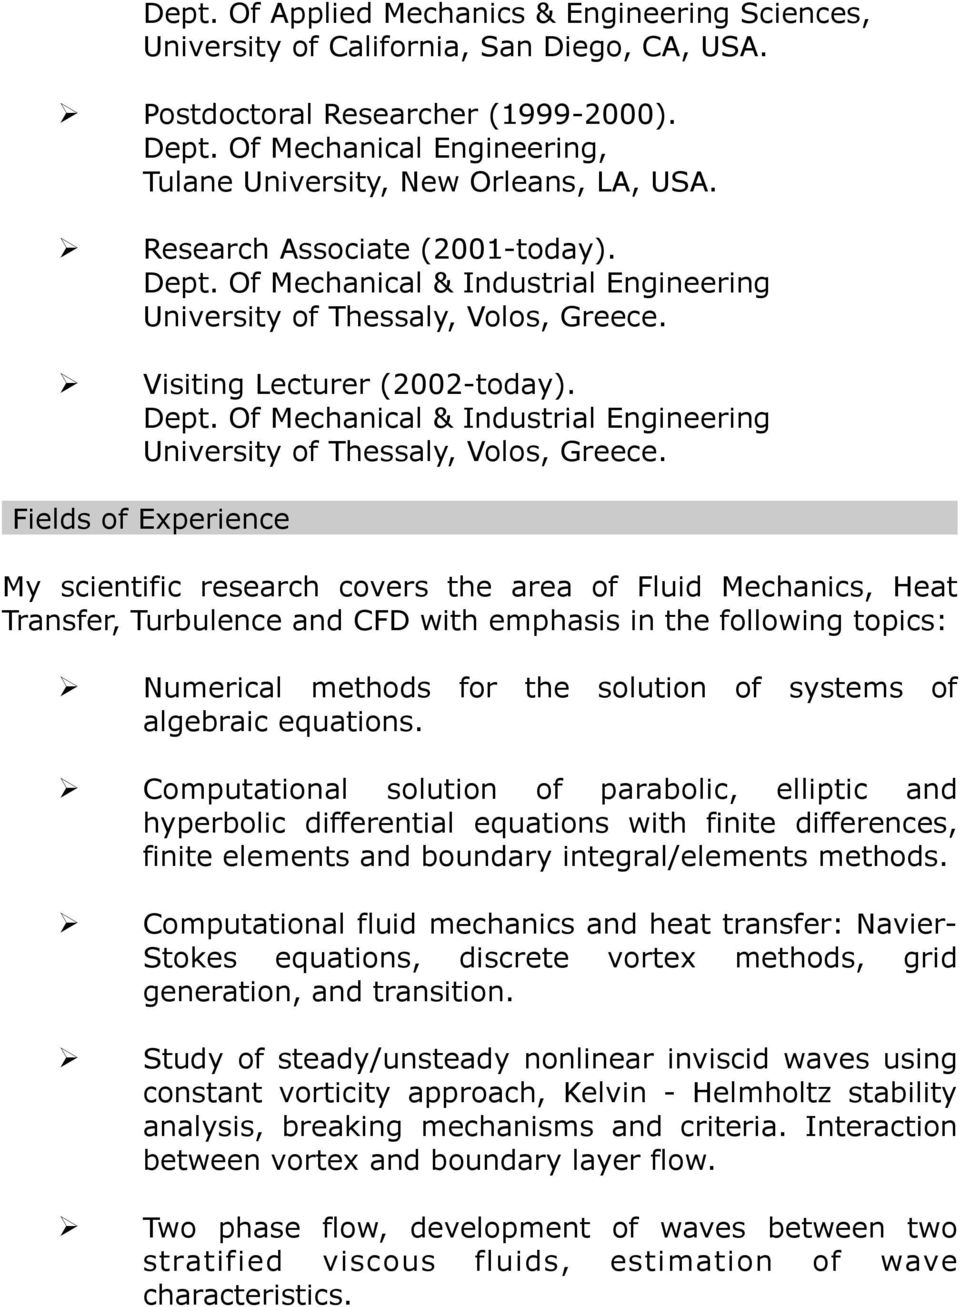 Visiting Lecturer (2002-today). Dept. Of Mechanical & Industrial Engineering University of Thessaly, Volos, Greece.